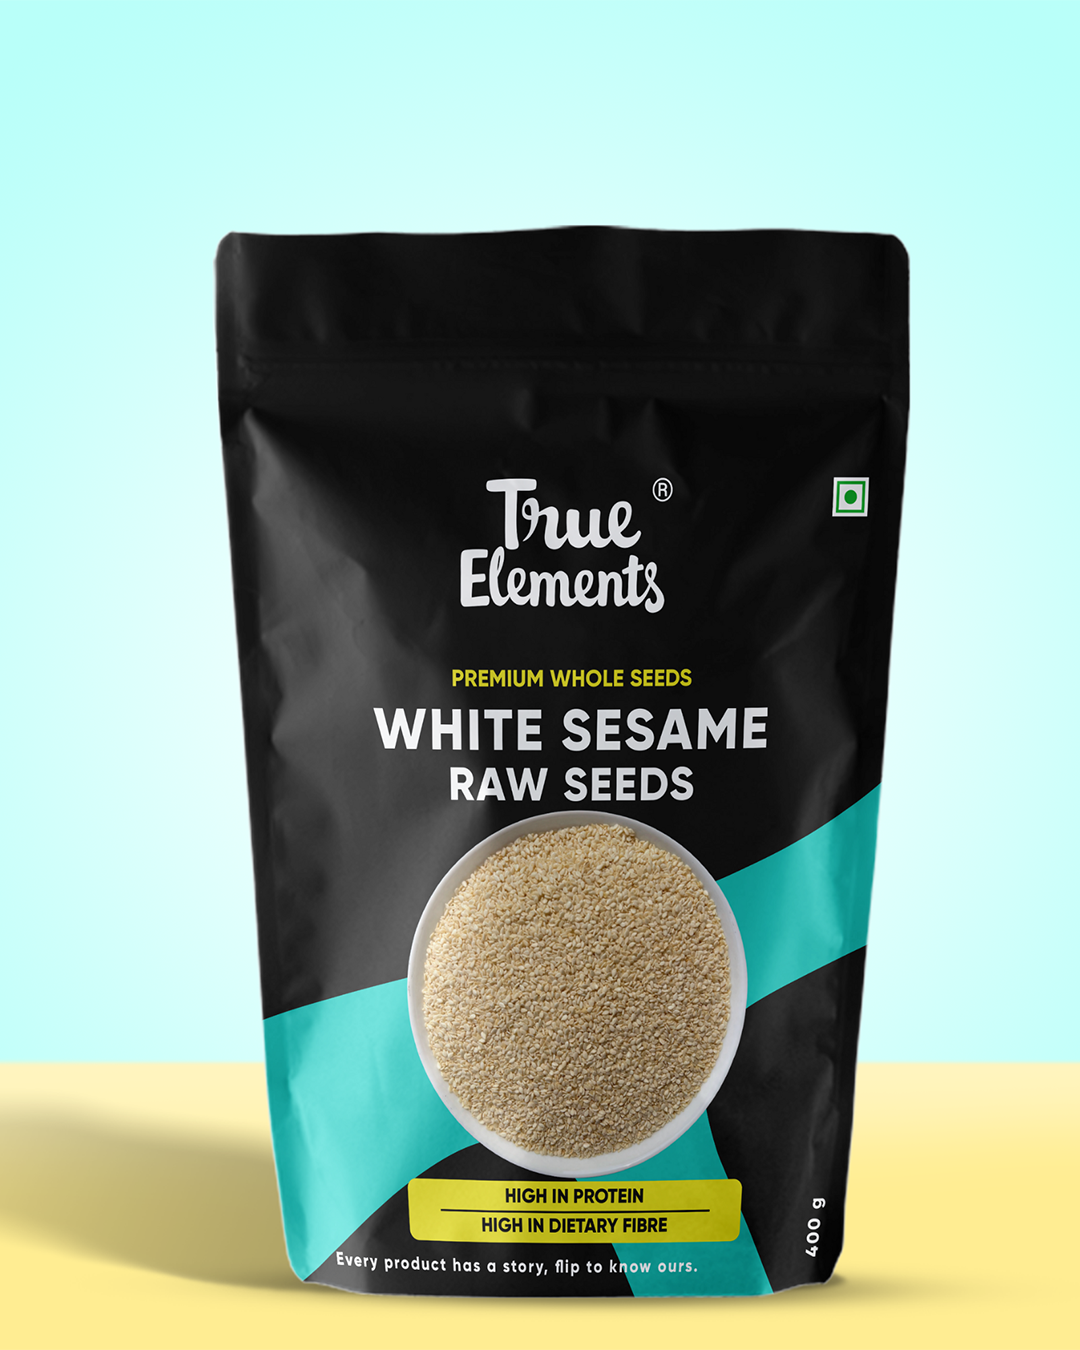 True elements raw white sesame seeds 400g Pouch (Premium Whole Seeds)